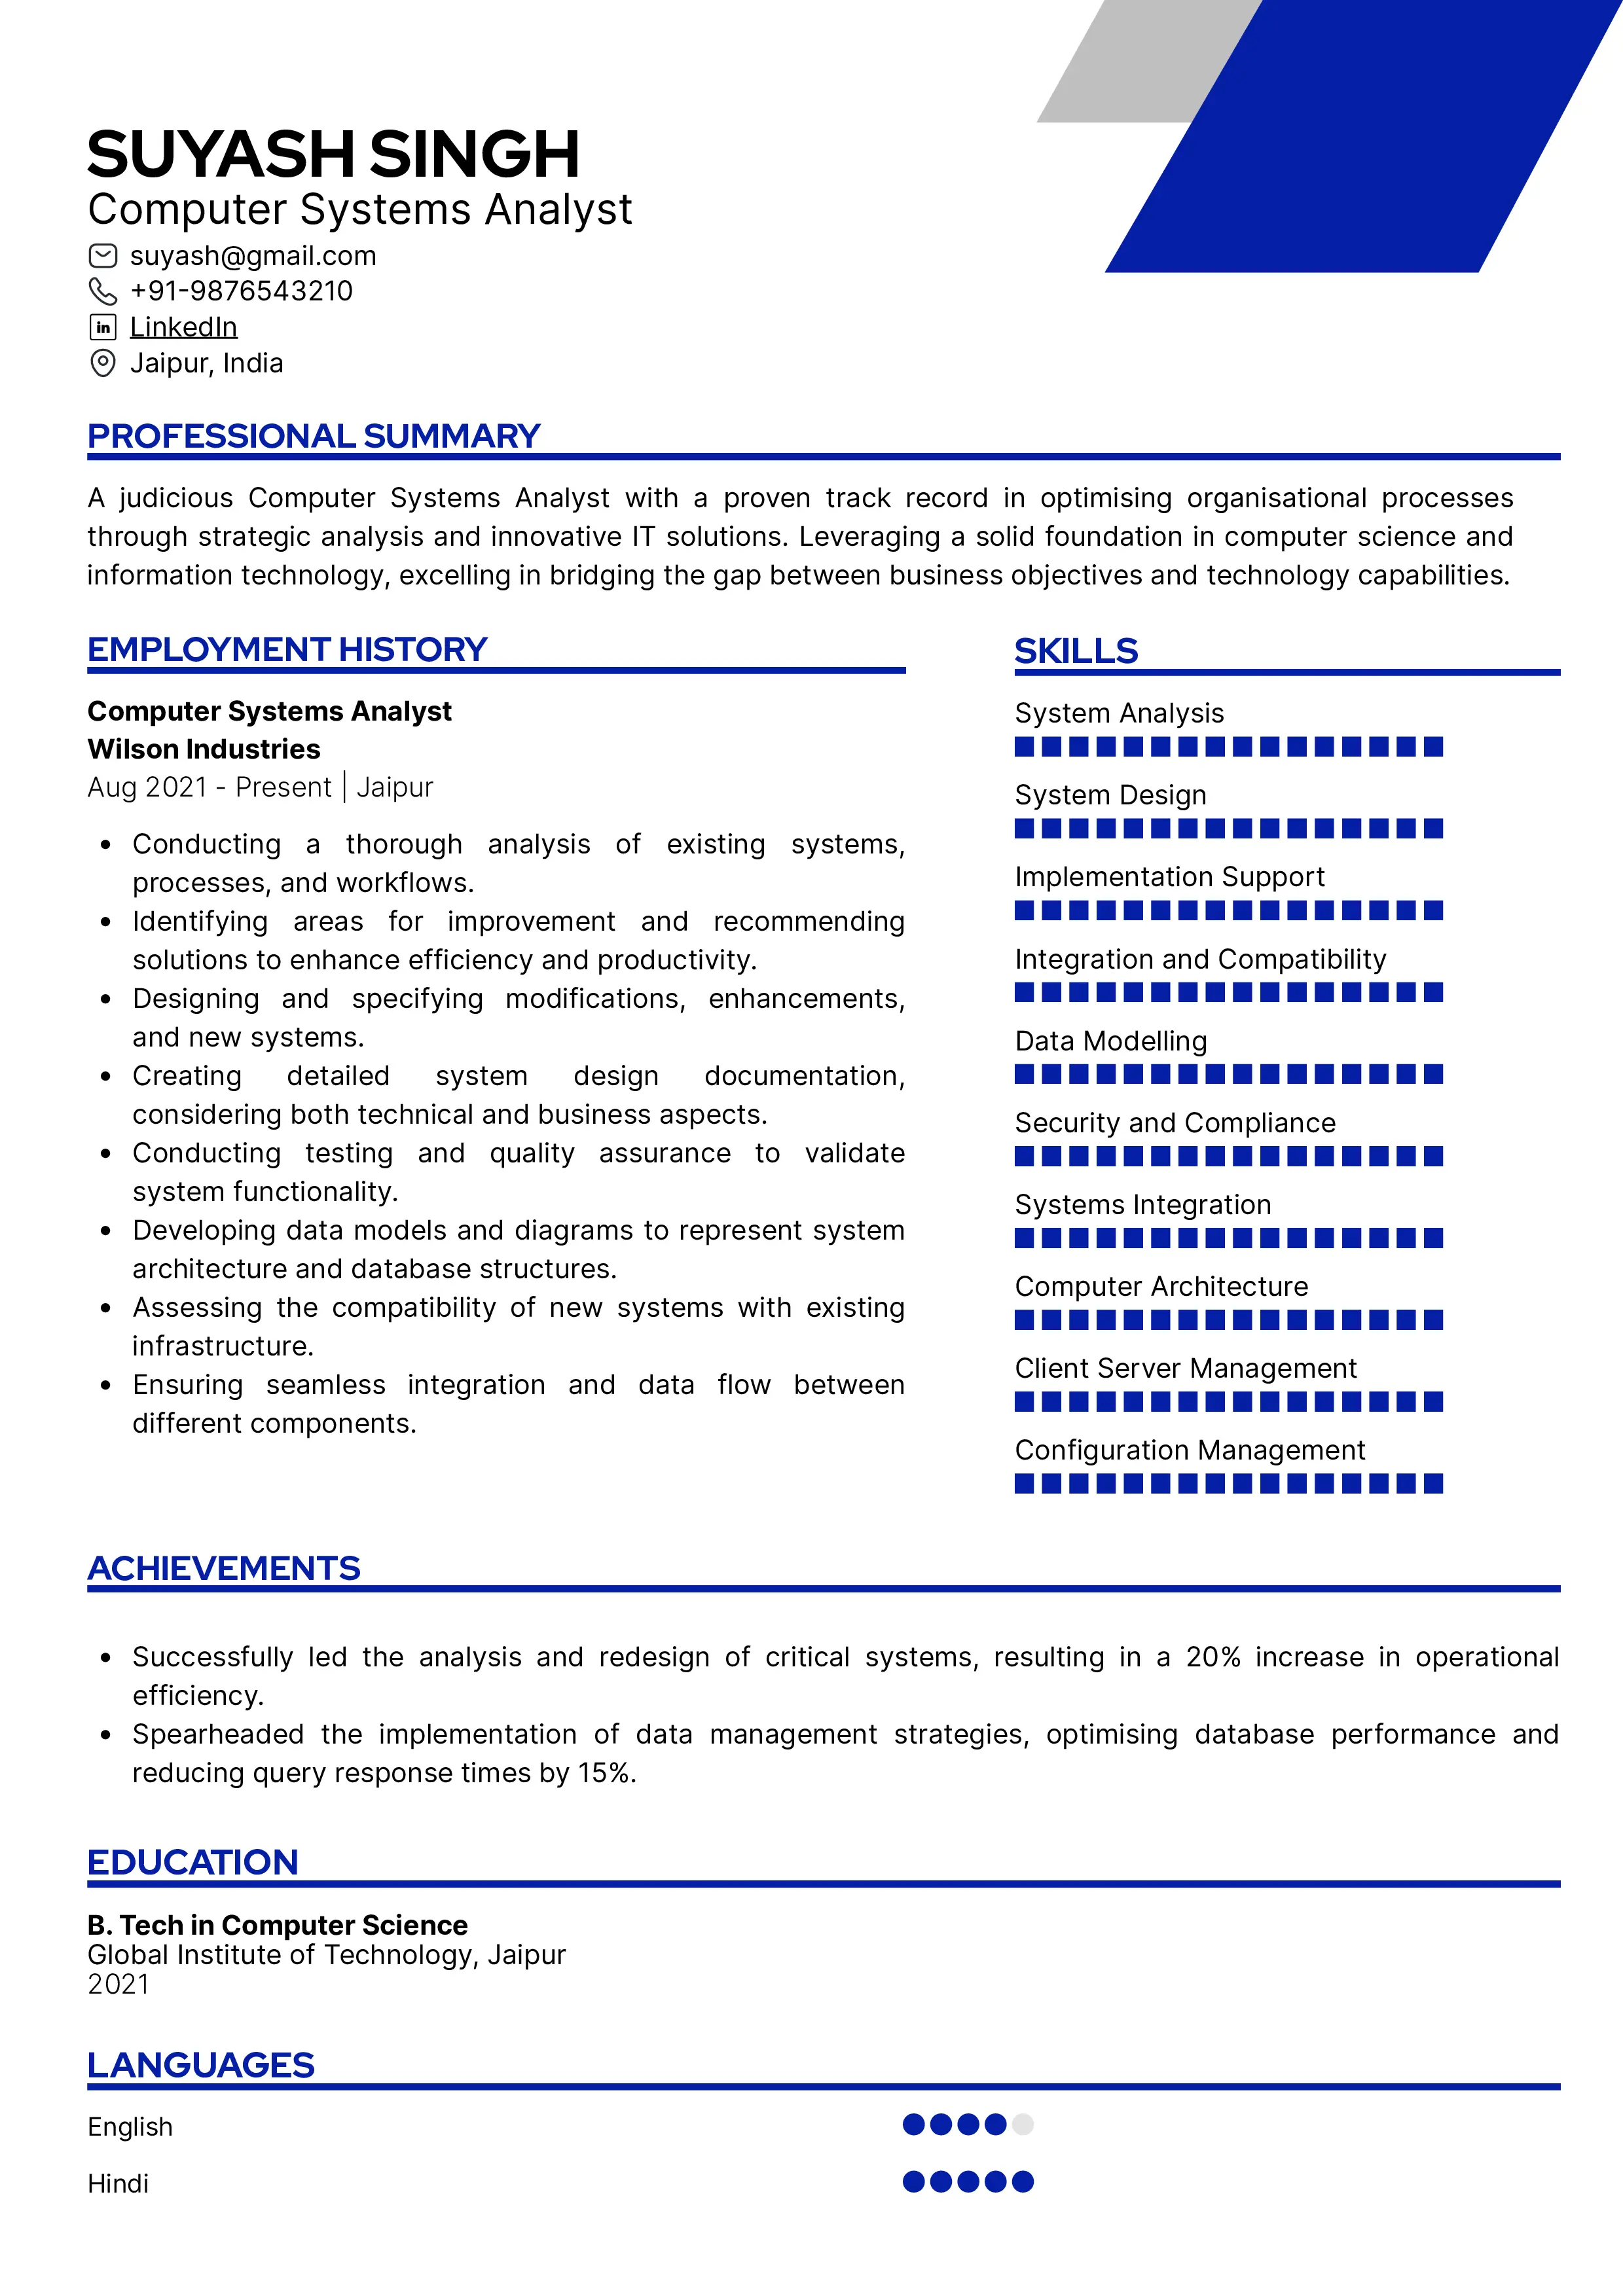 Sample Resume of Computer Systems Analyst | Free Resume Templates & Samples on Resumod.co